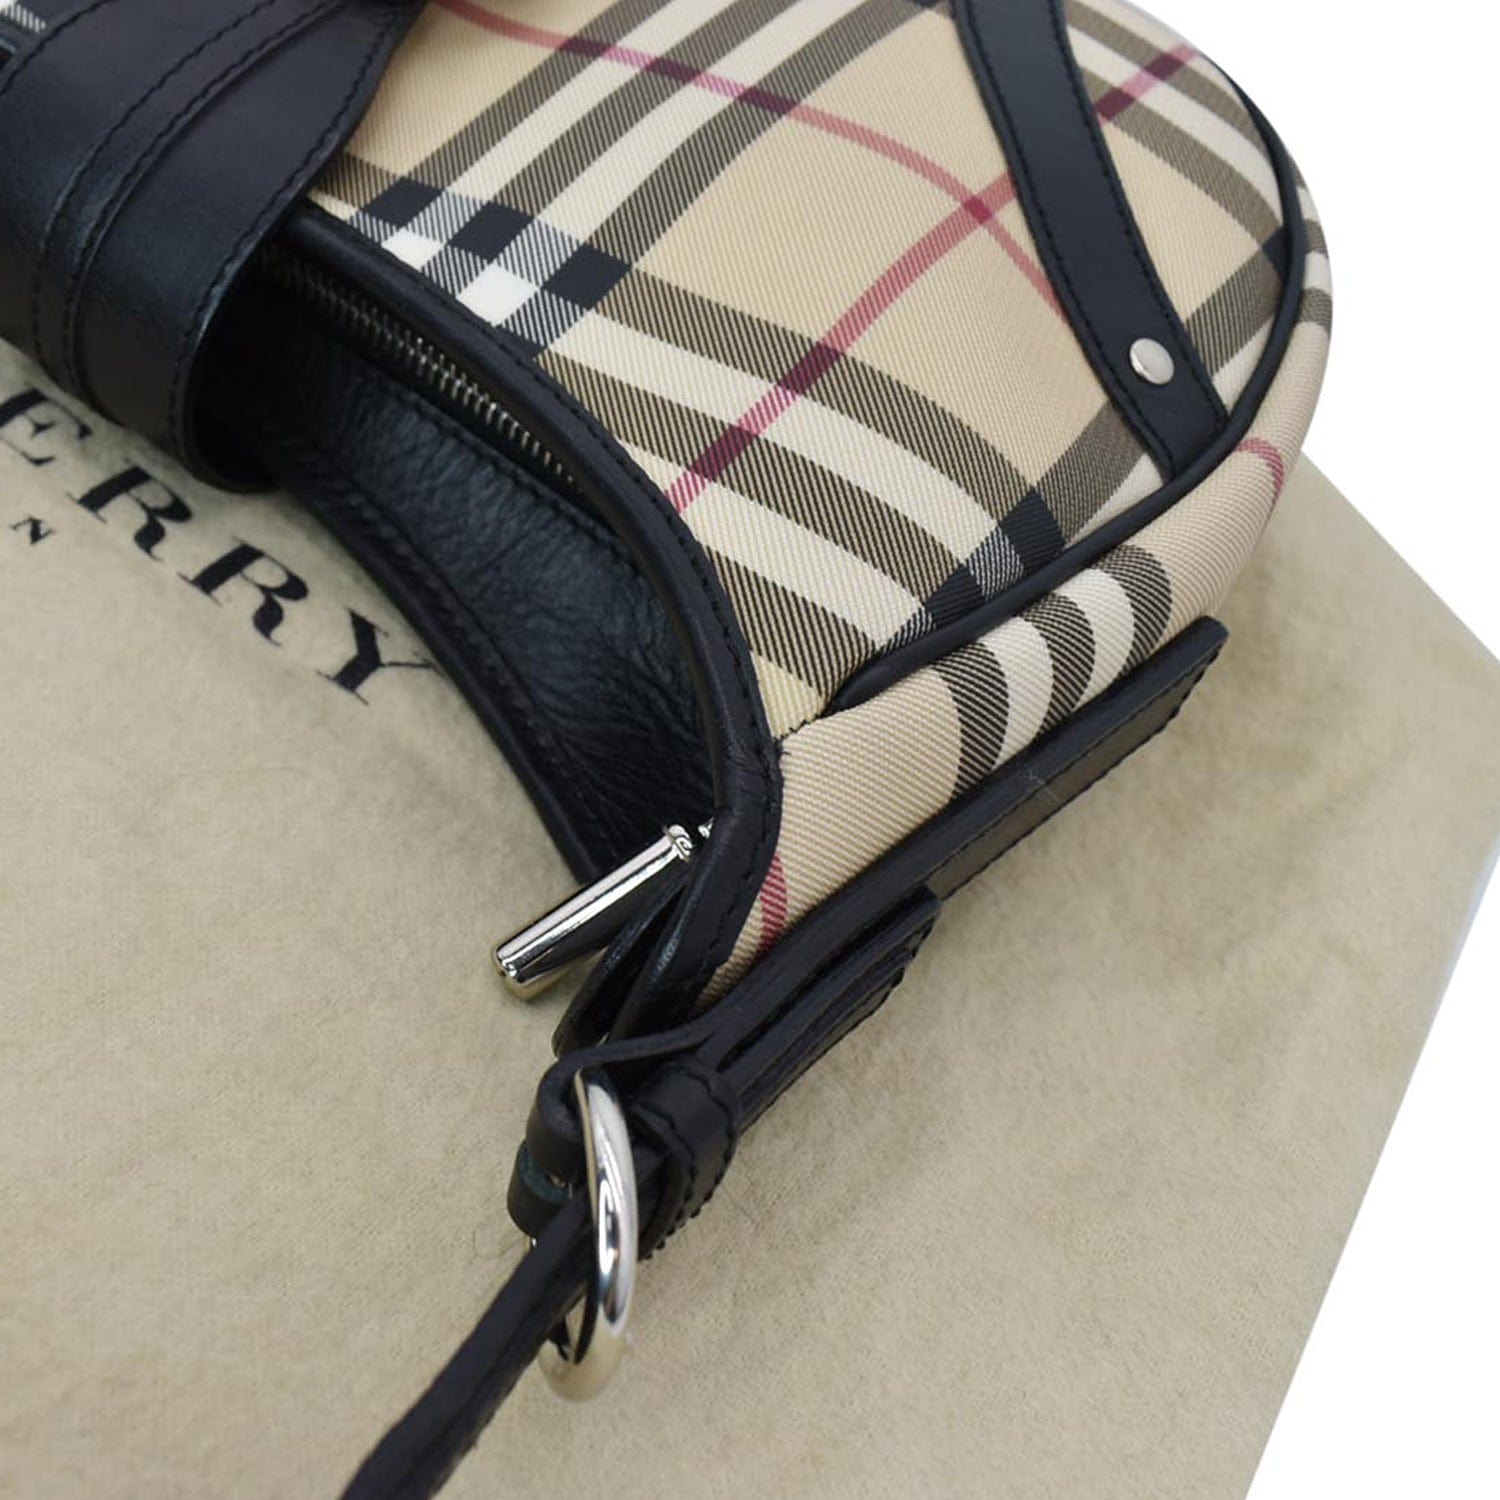 Burberry Dark Red/Beige House Check Canvas and Leather Small